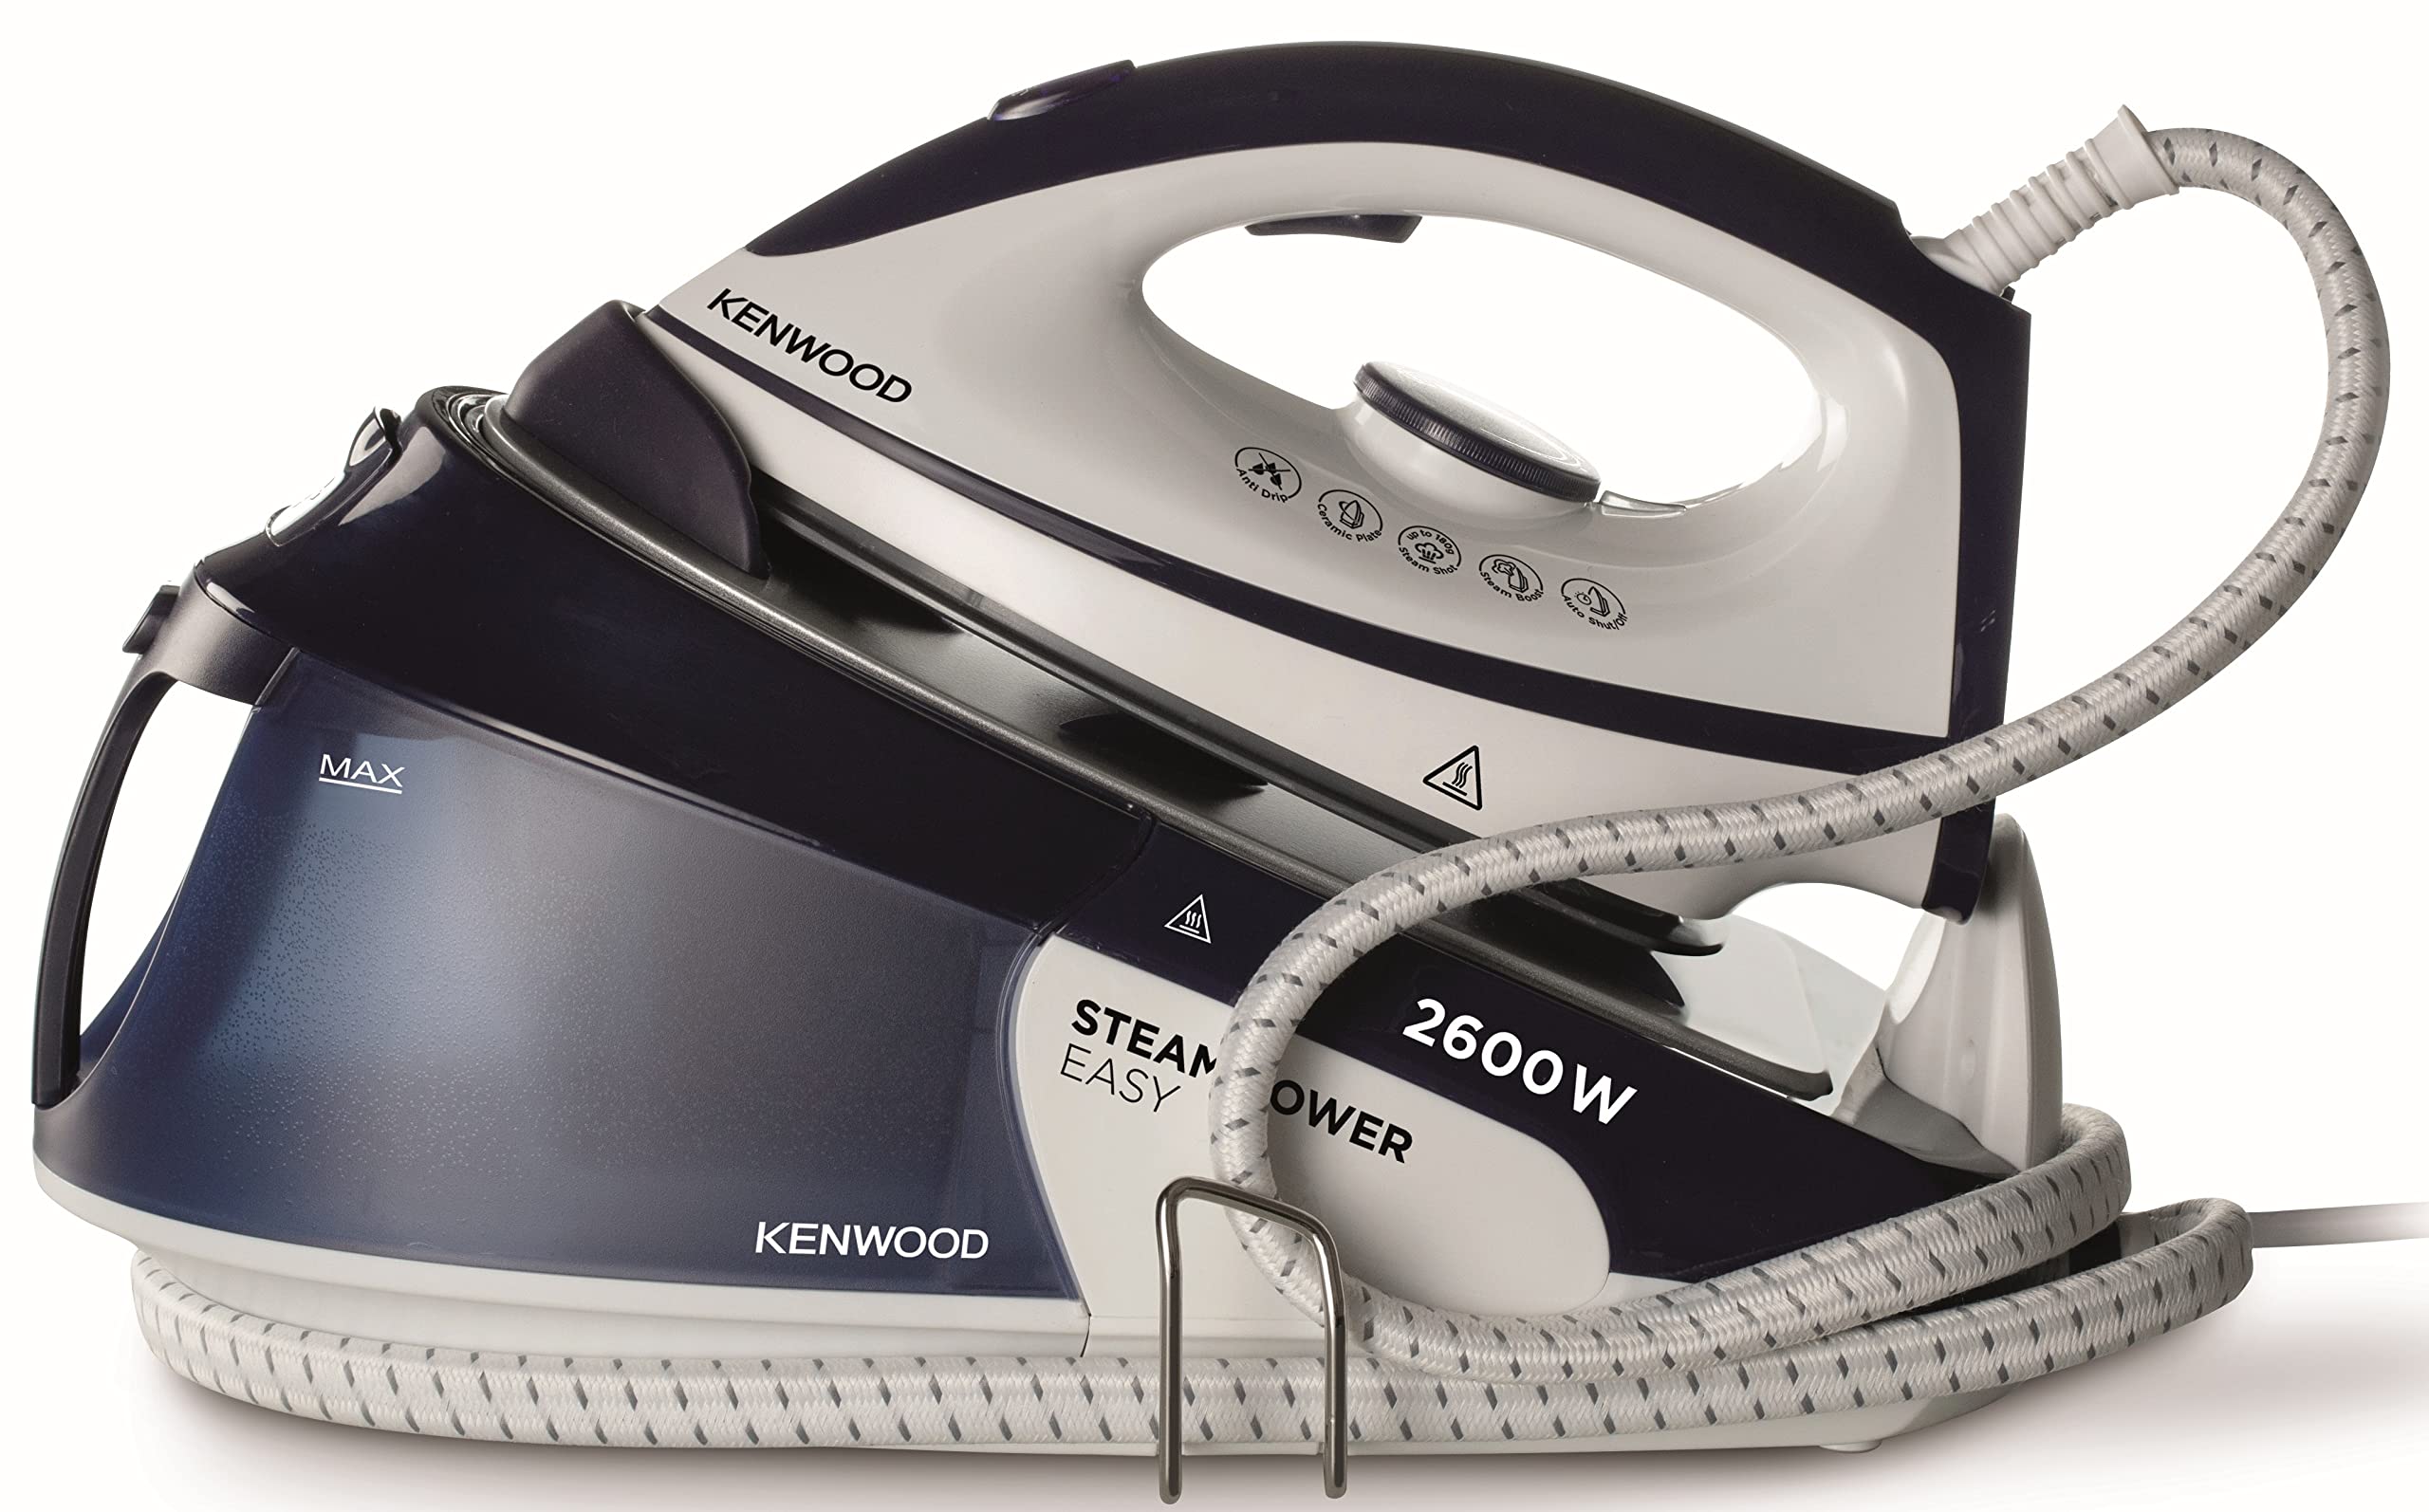 KENWOOD Steam Iron Steam Station 2600W with 1.8L Water Tank Capacity, Ceramic Soleplate, 180g Steam Shot, Anti Drip, Auto Shut Off, Self Clean Function SSP20.000WB White/Blue